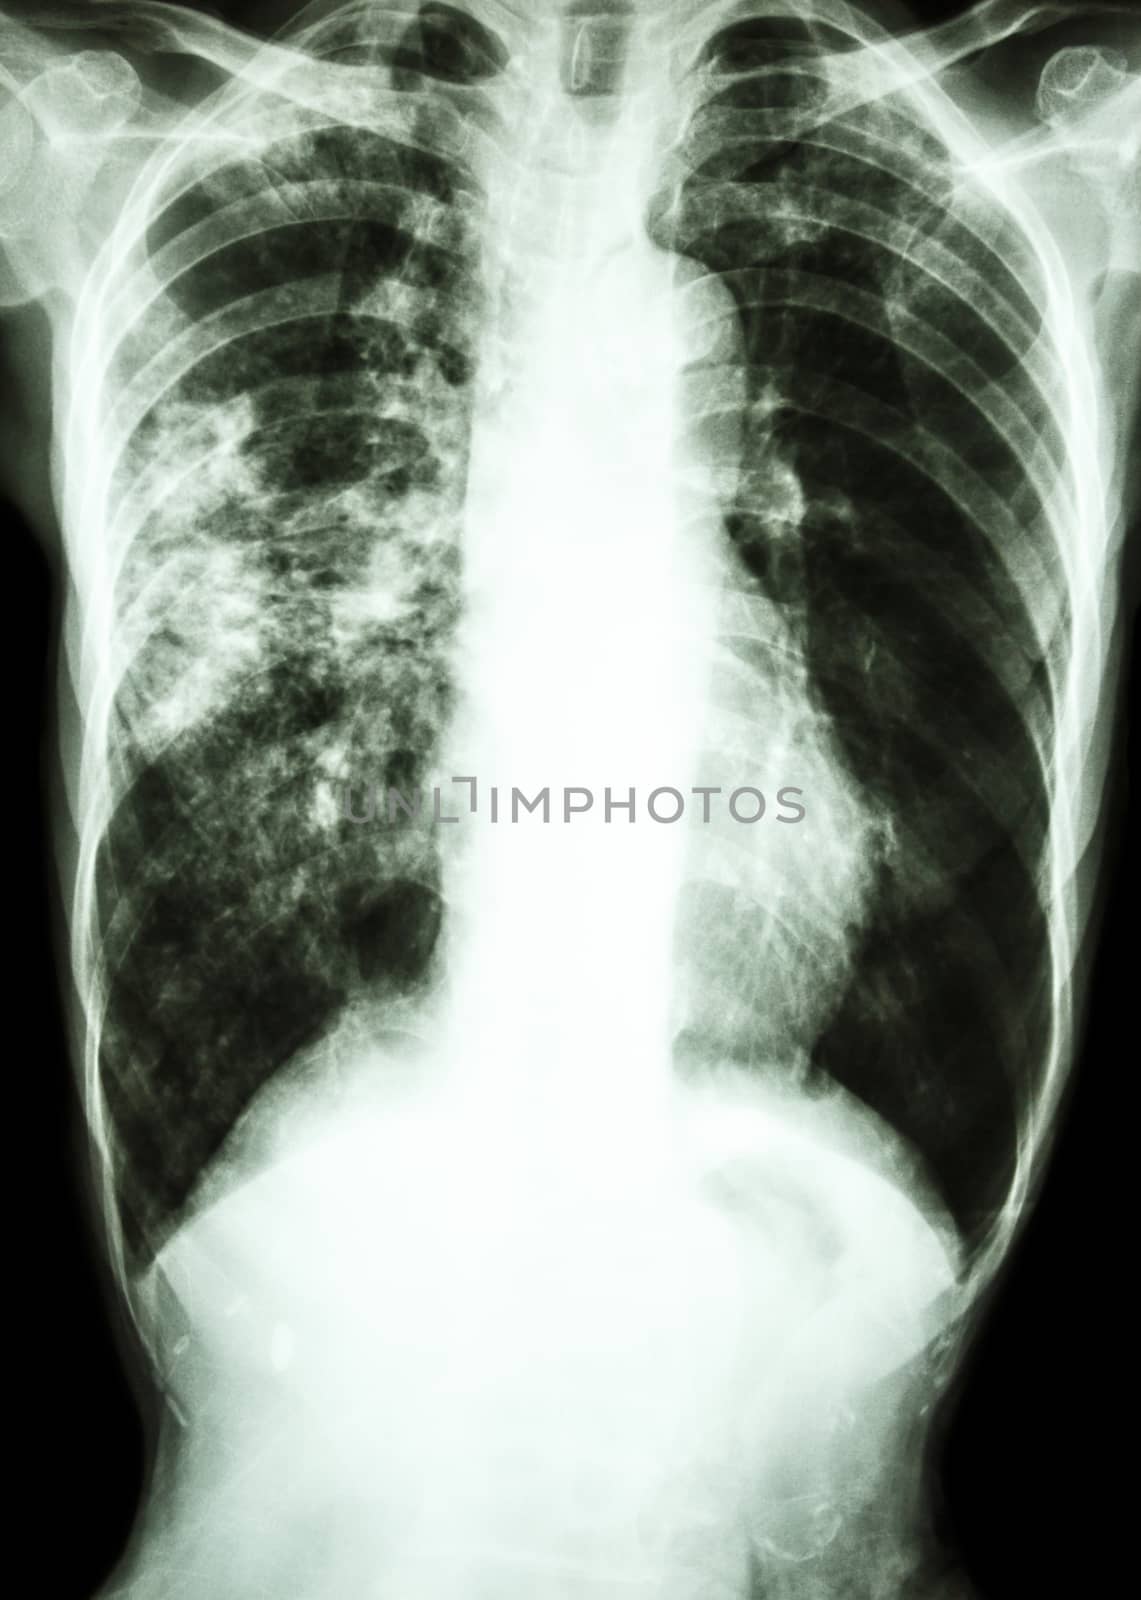 film chest x-ray show alveolar infiltrate at right lung due to Mycobacterium tuberculosis infection (Pulmonary Tuberculosis)